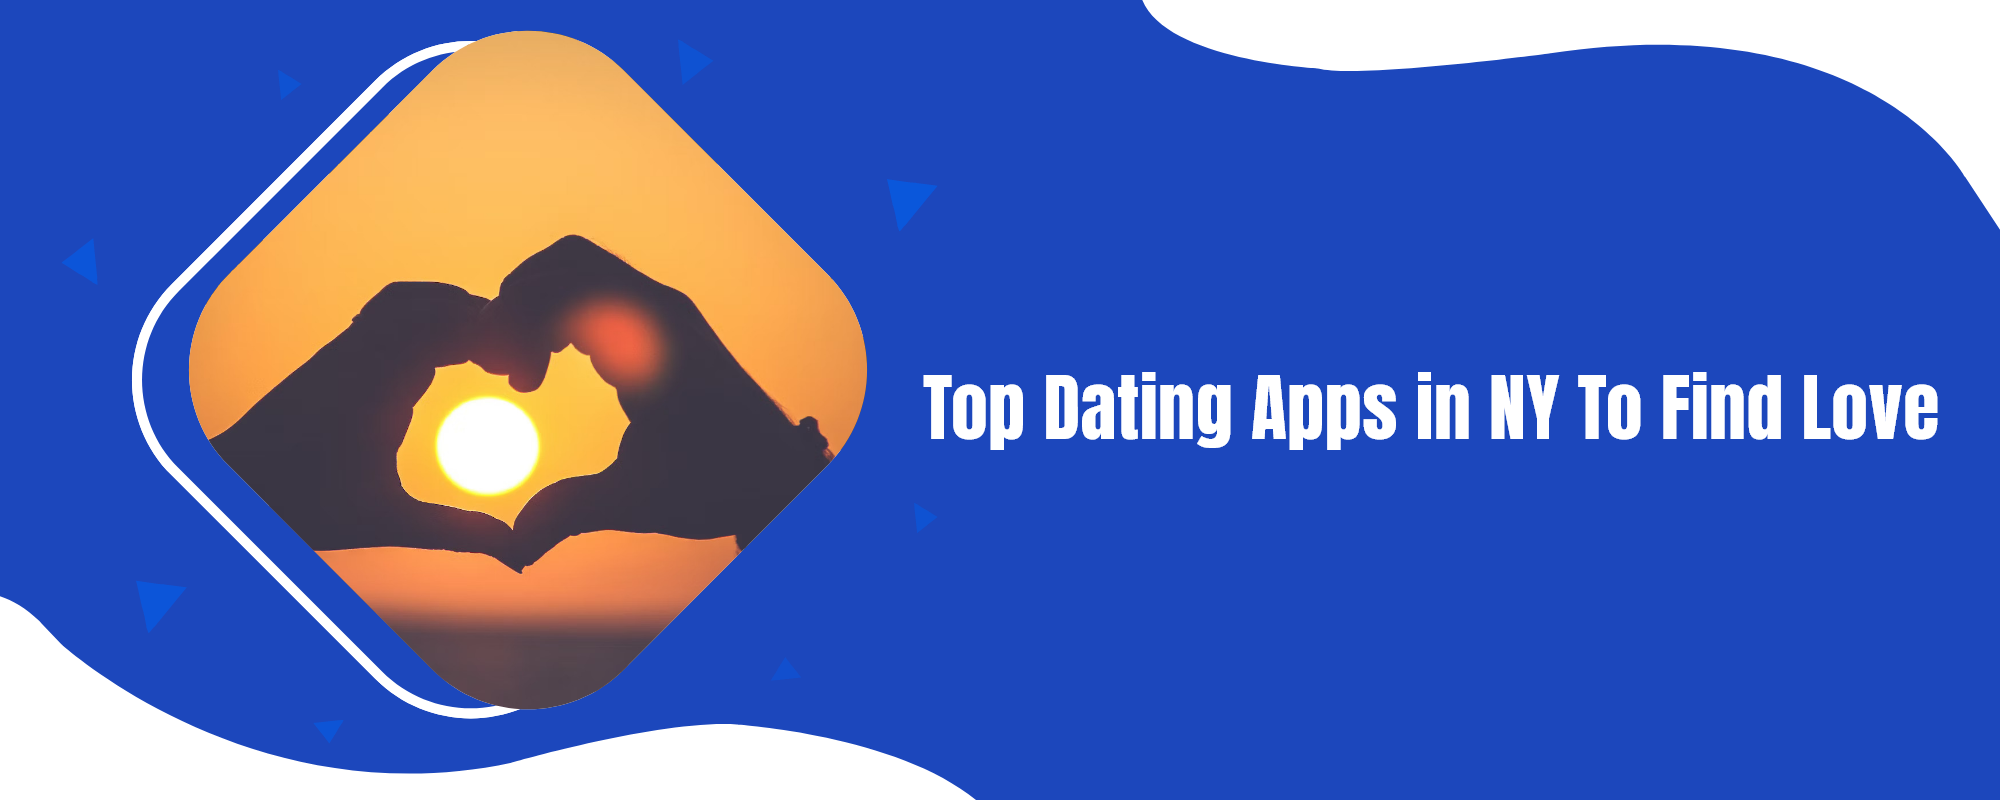 Top Dating Apps In NY